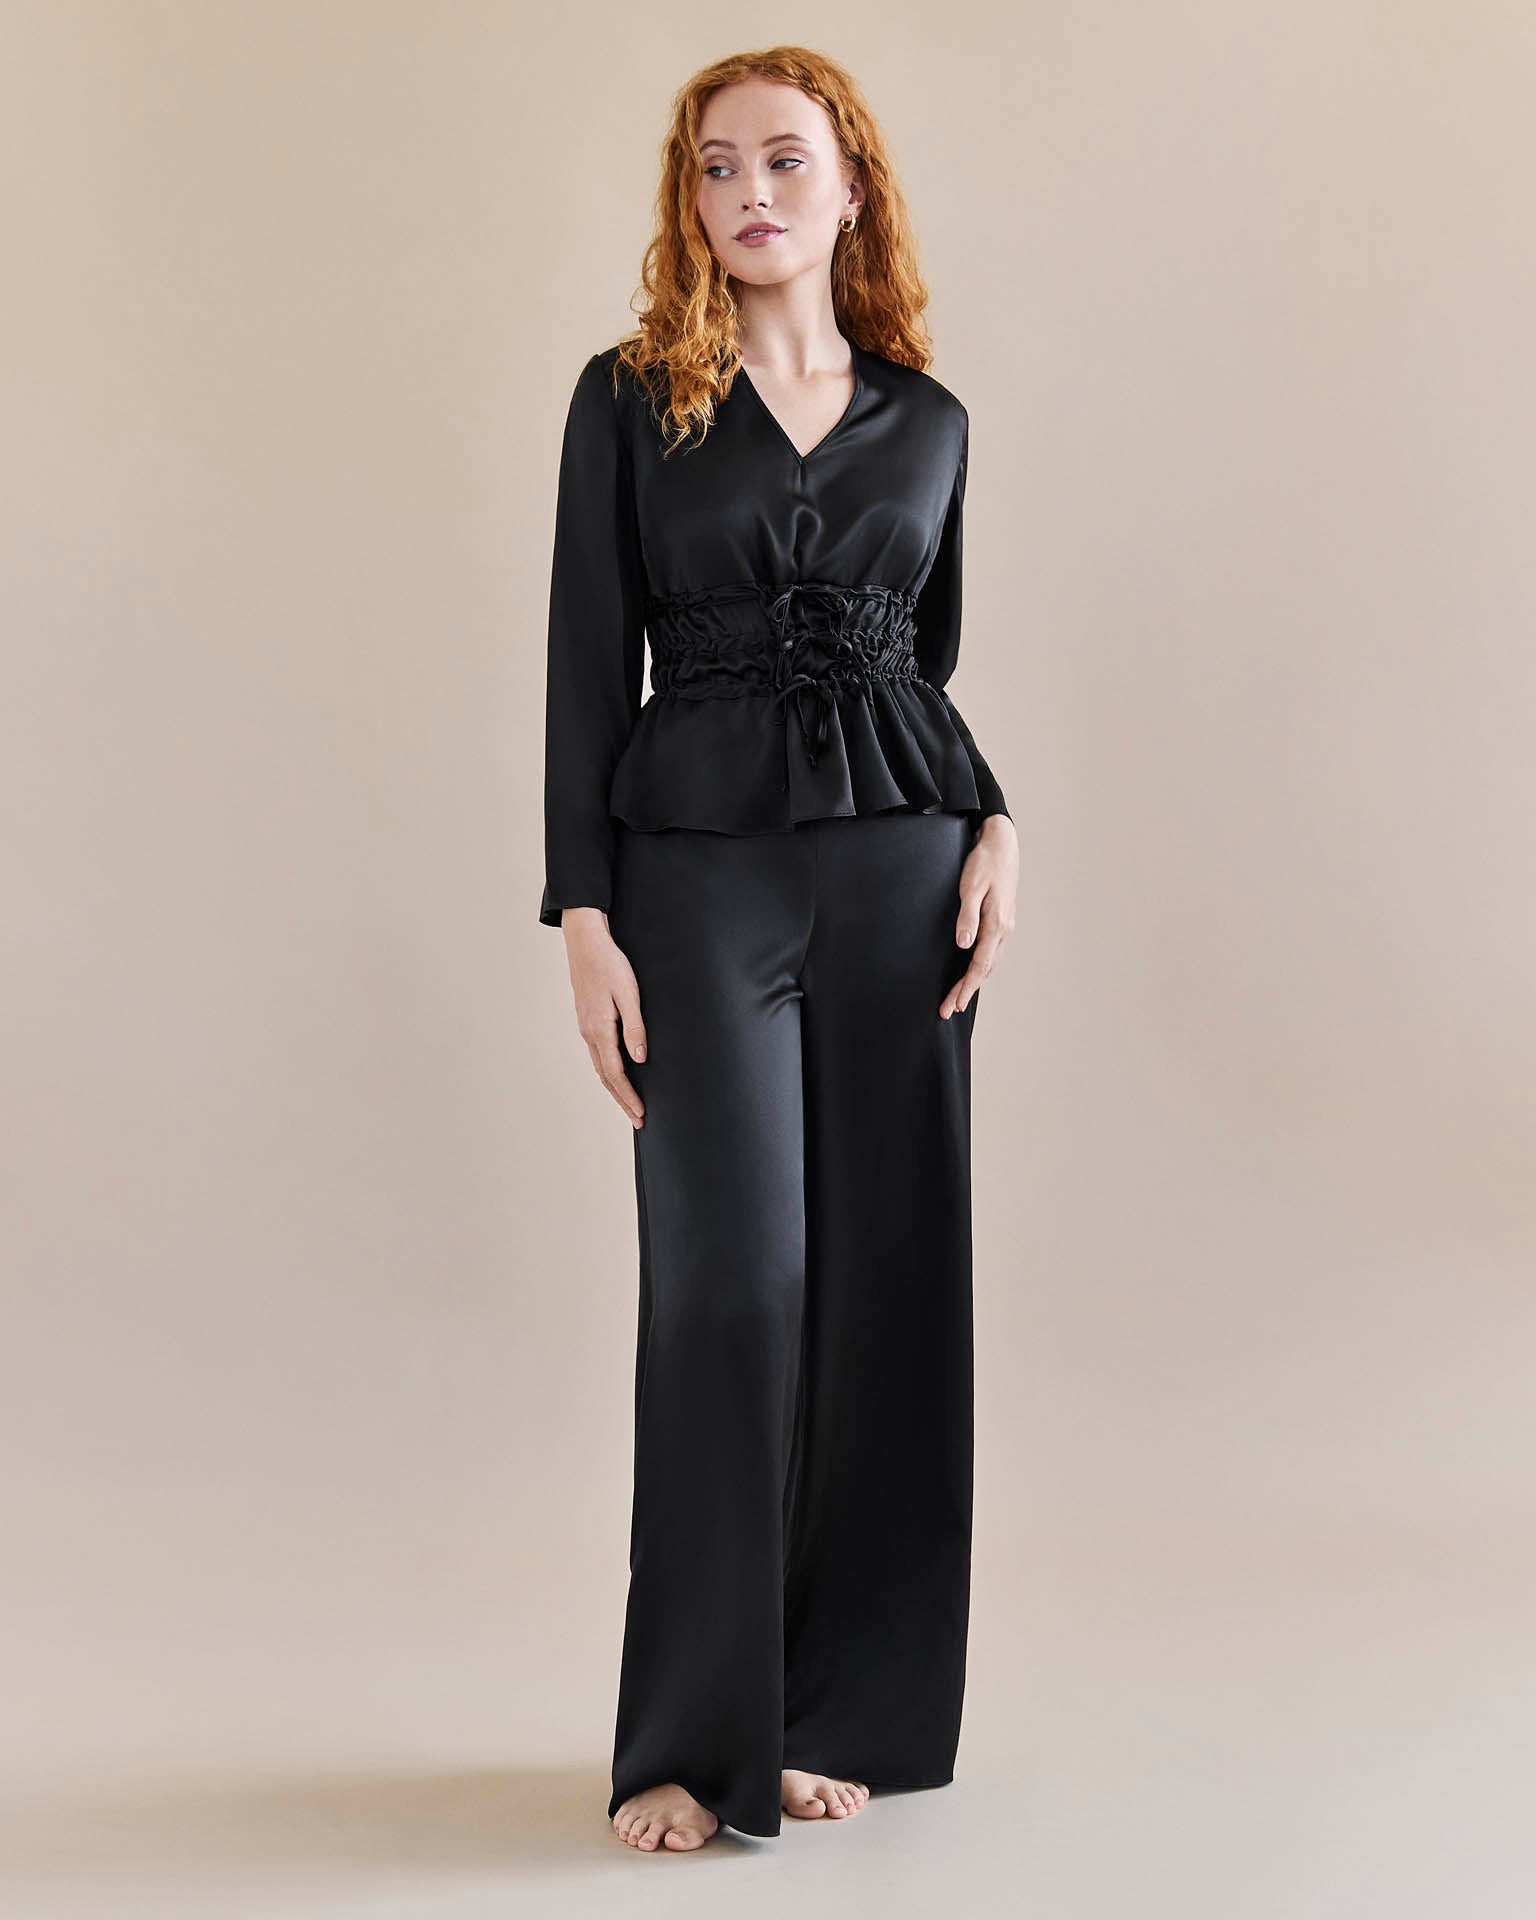 Model wears black silk tie waist top cinched in at the waist for an hourglass look and a pair of black, silk, wide legged trousers with a tuxedo stripe.